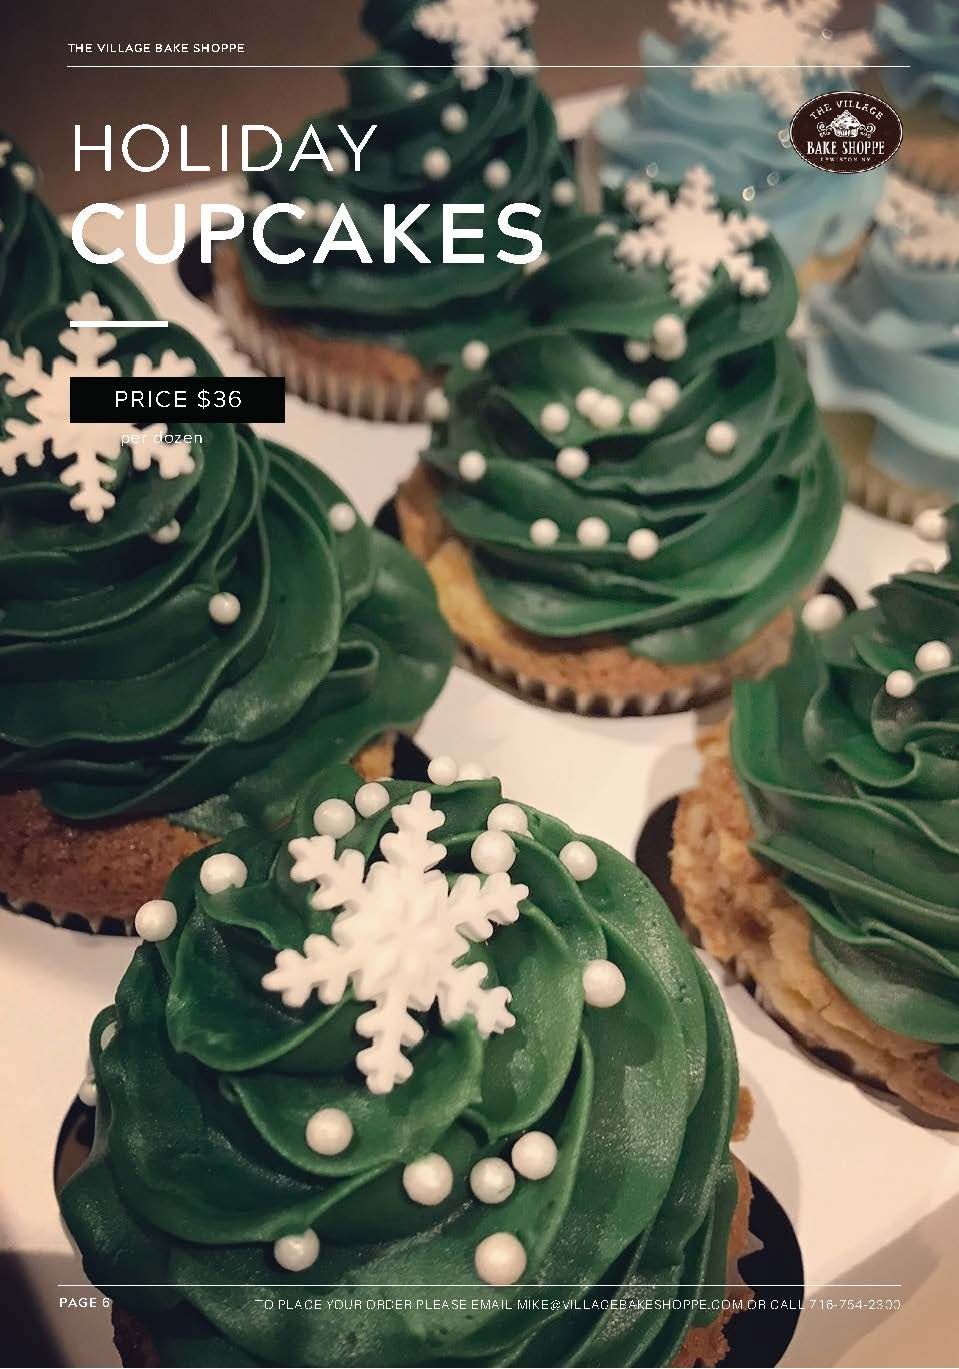 a box of holiday cupcakes with green frosting and snowflakes